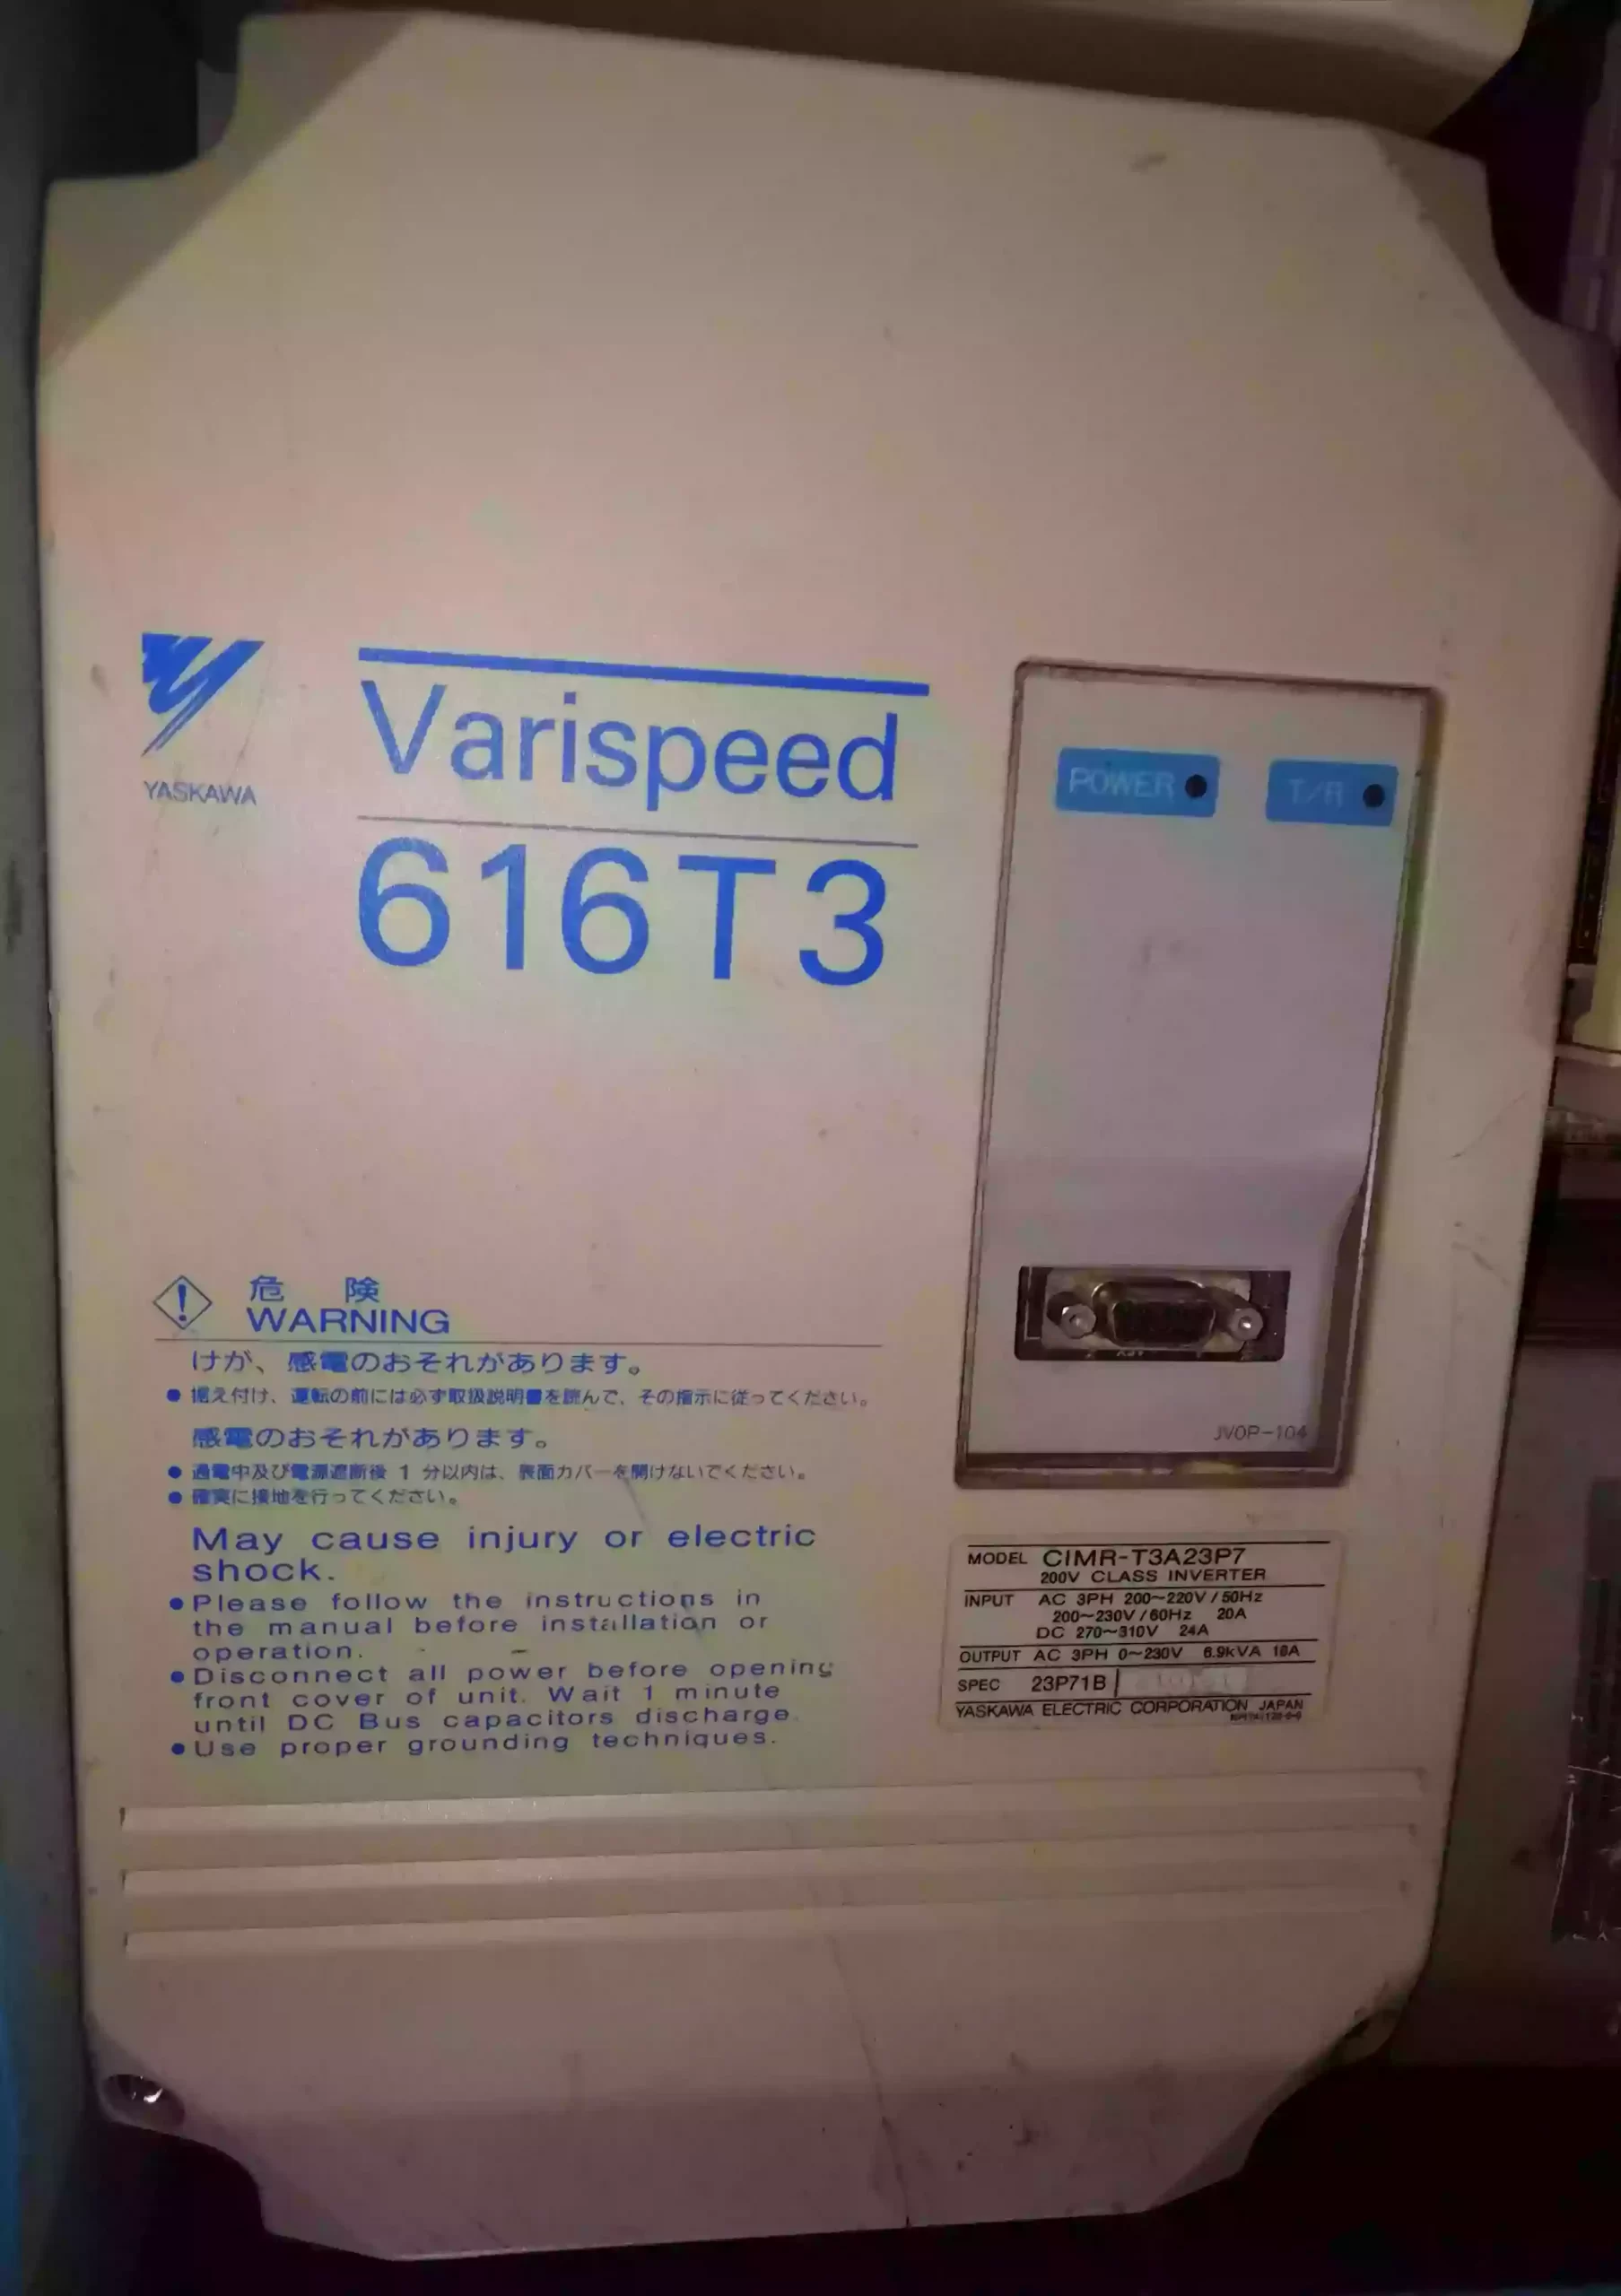 Yaskawa Varispeed 616T3 CIMR-T3A23P7 CIMR-T3A21P5 200V class inverter 616G3 616G5 616PC5 A1000 J1000 G7 V7 P7 F7 E7 VFD Variable frequency drive speed controller in stock